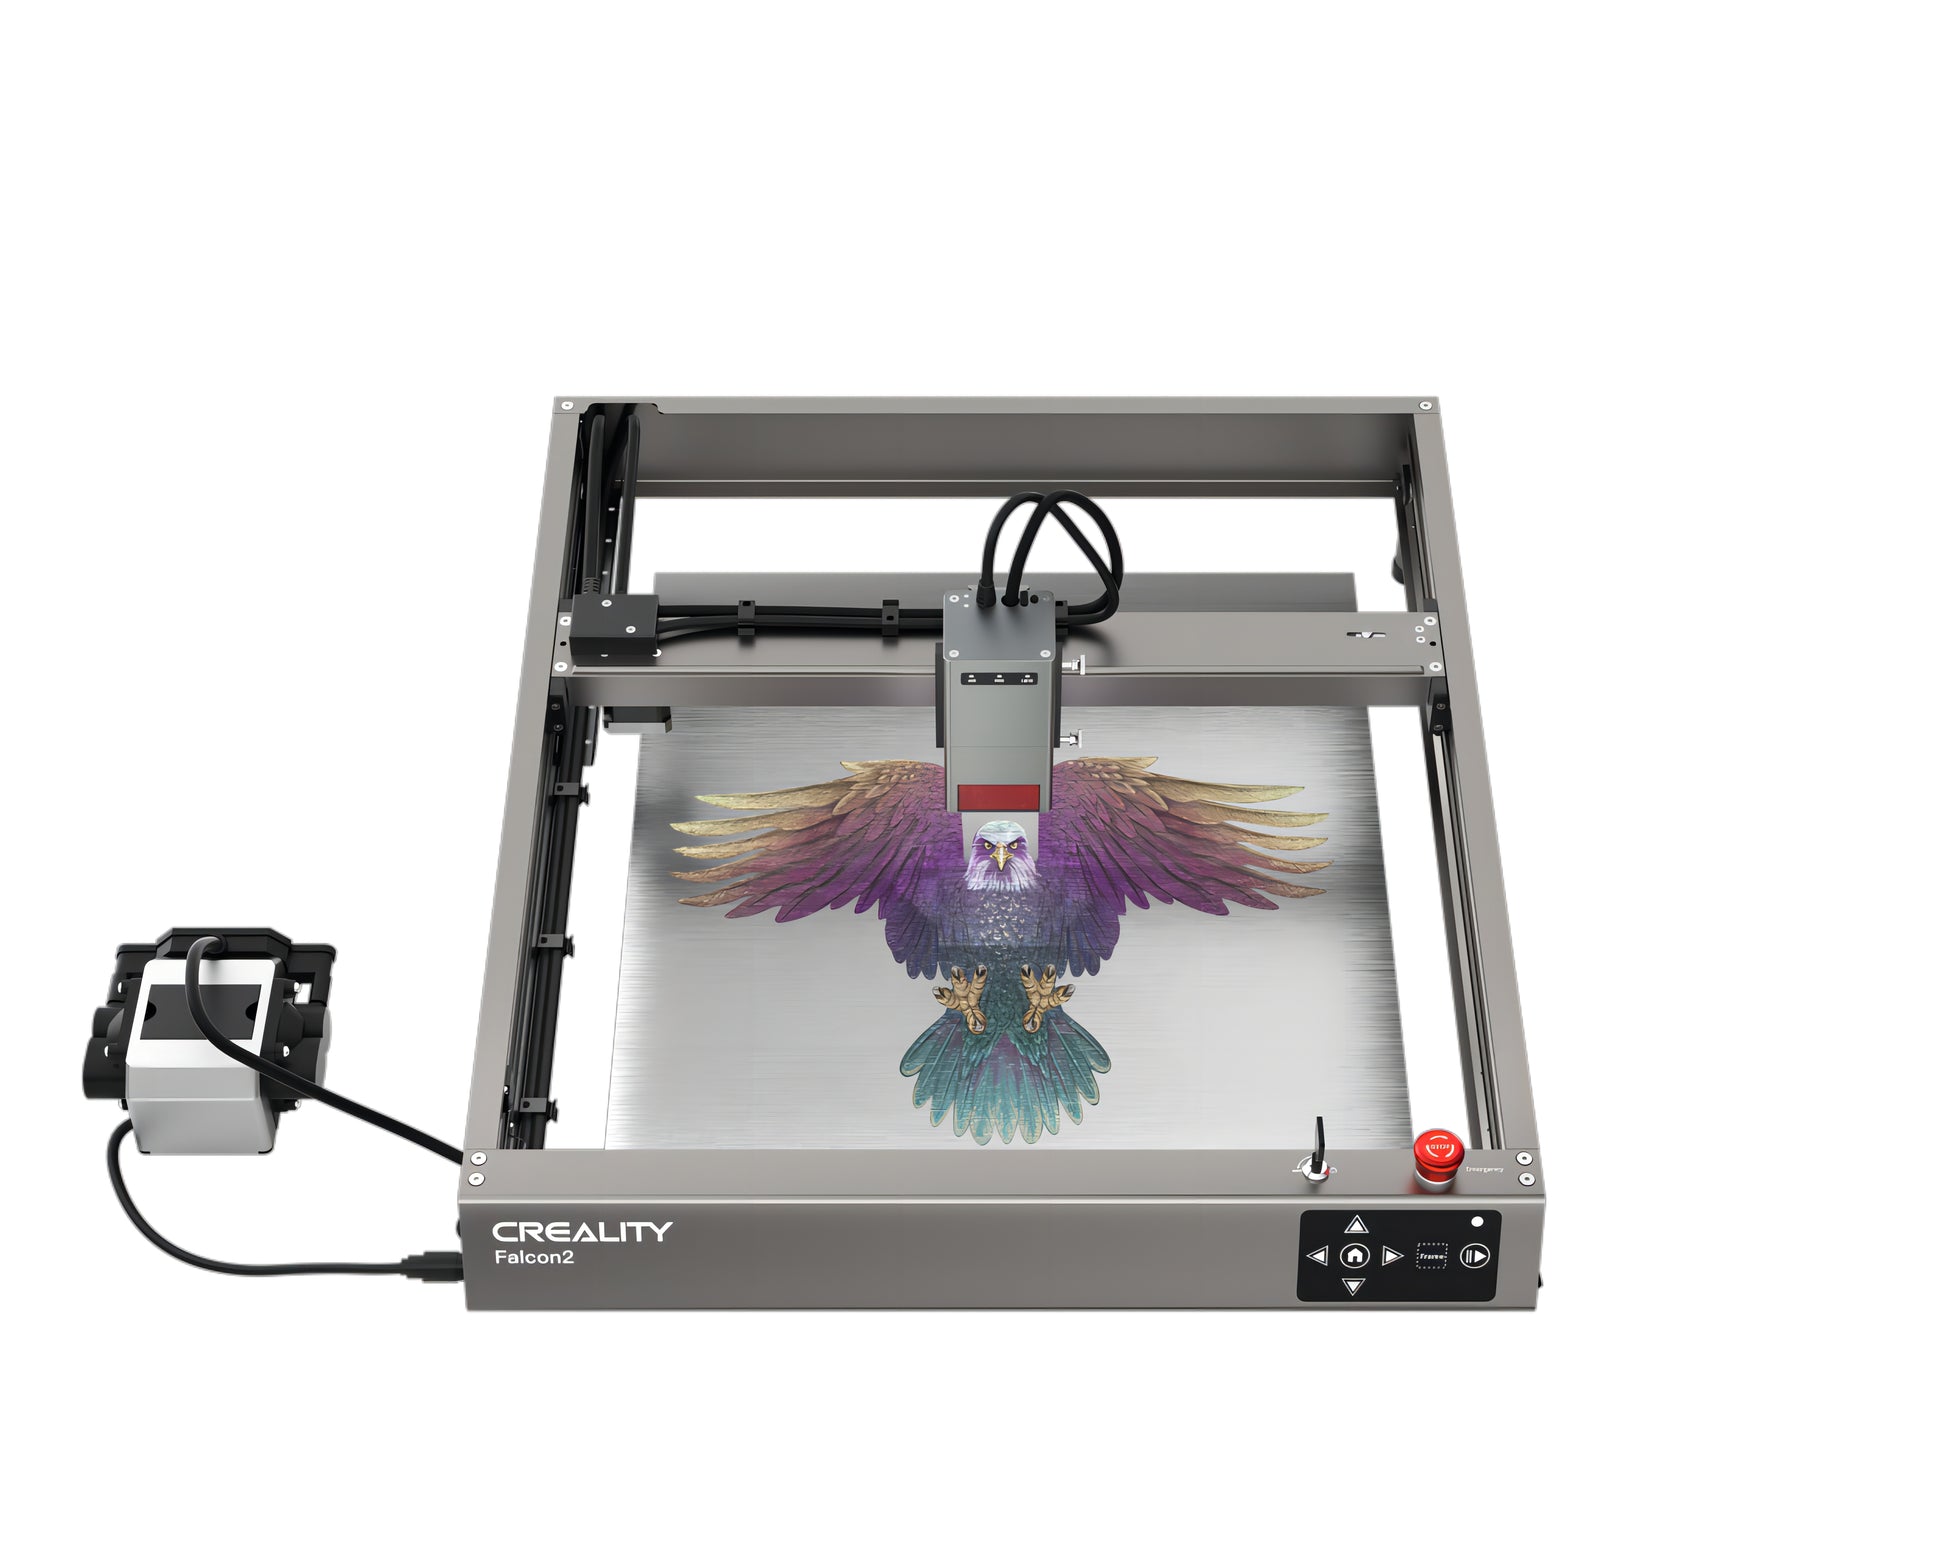 Creality Falcon2 Laser Engraver 22W Engraving Cutting Machine Integrated Air Assist wood engraving